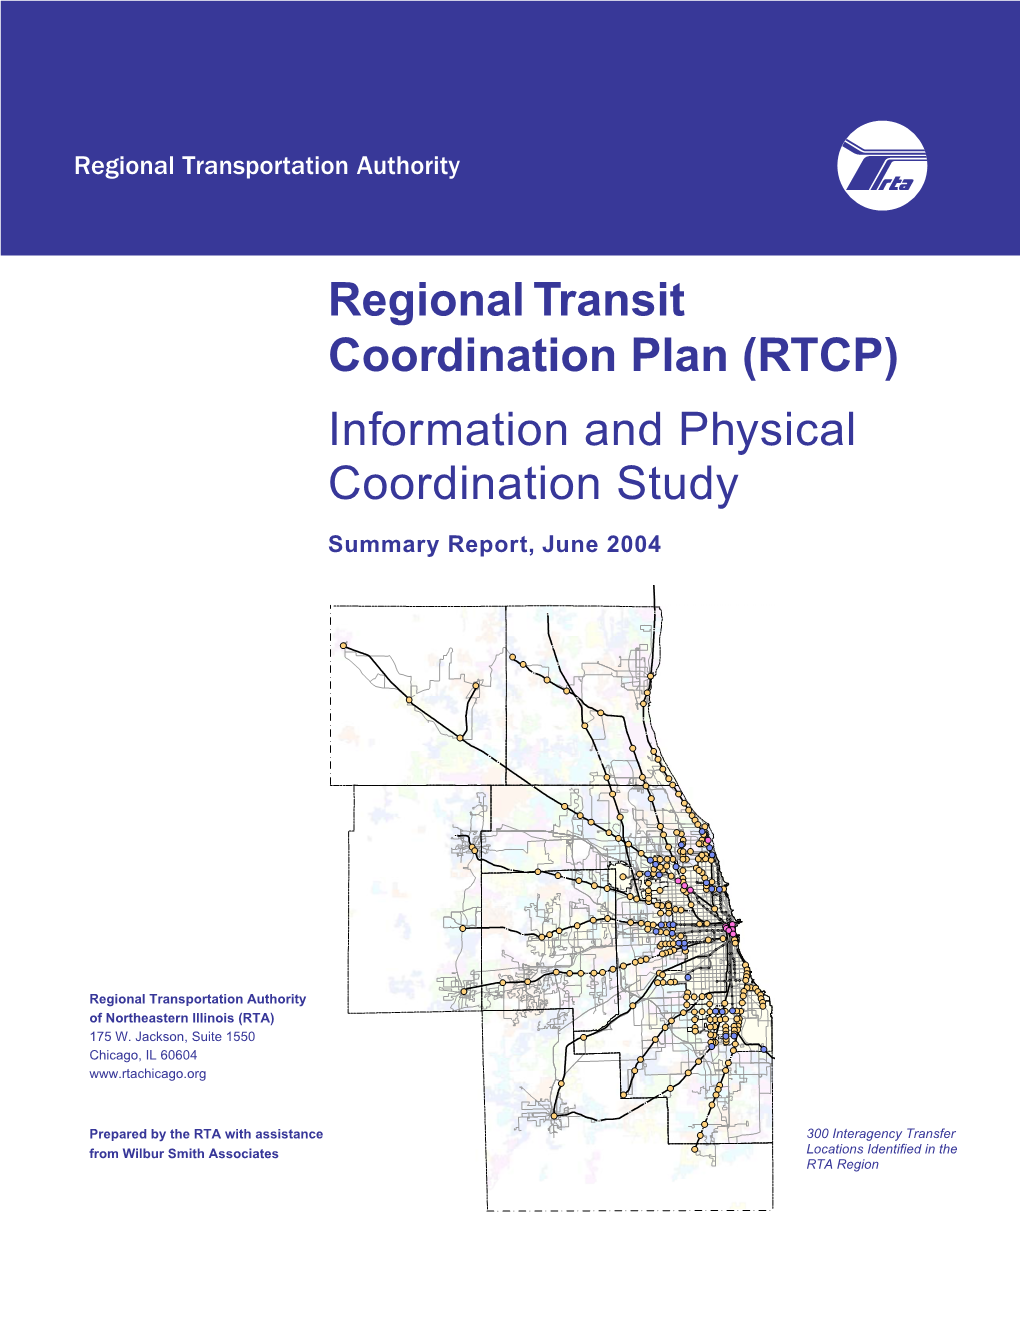 Regional Transit Coordination Plan (RTCP) Information and Physical Coordination Study